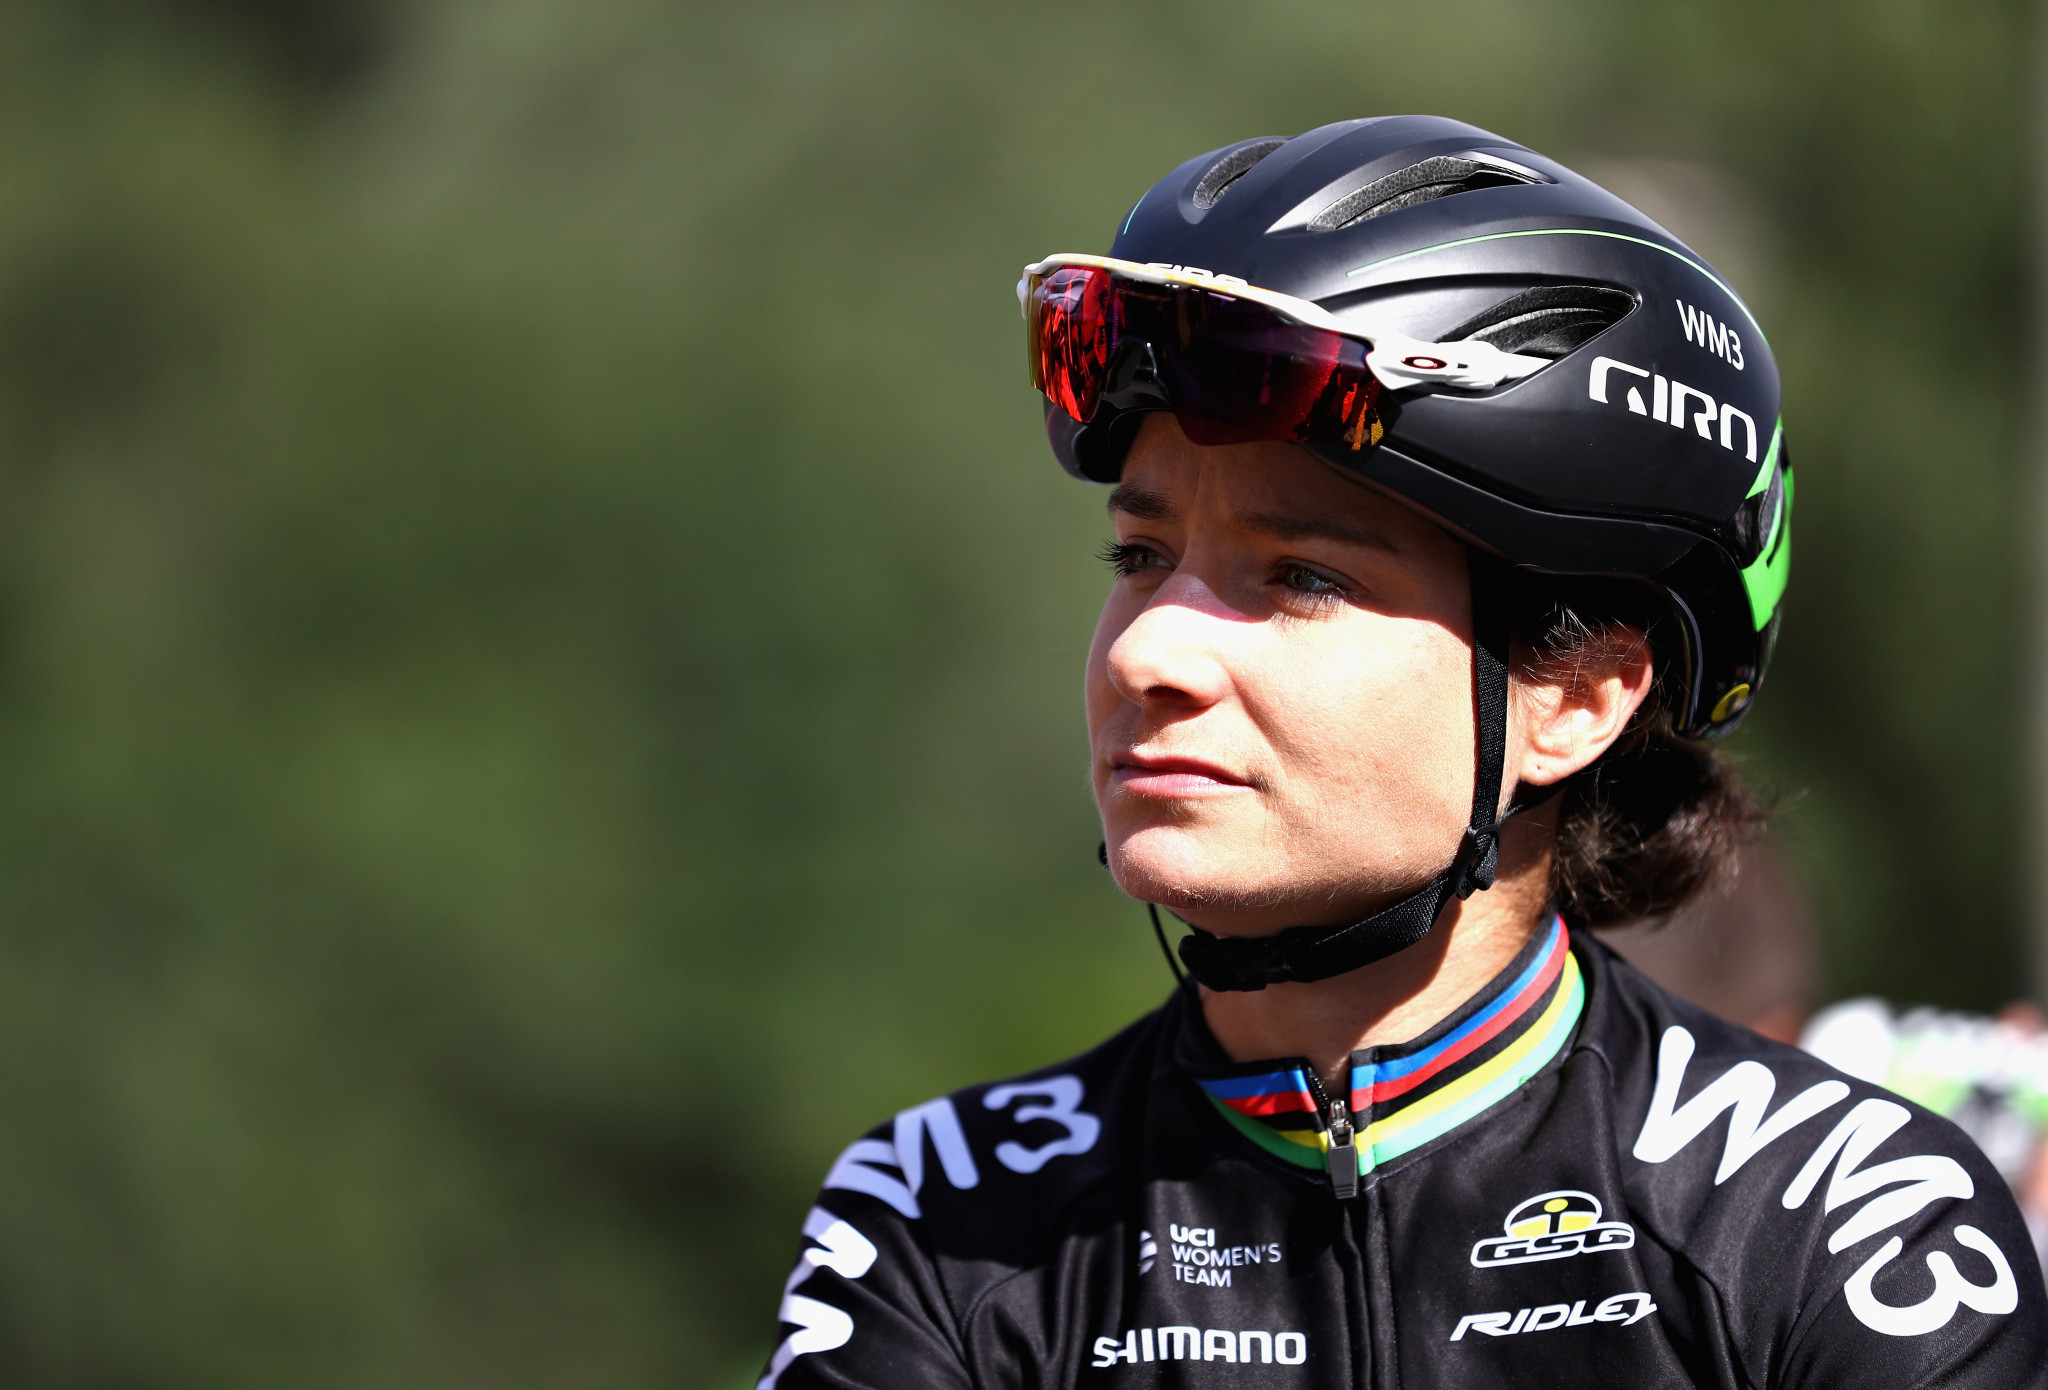 Dutch cyclist Marianne Vos snatched victory on the sixth stage of the Giro Rosa ©Getty Images